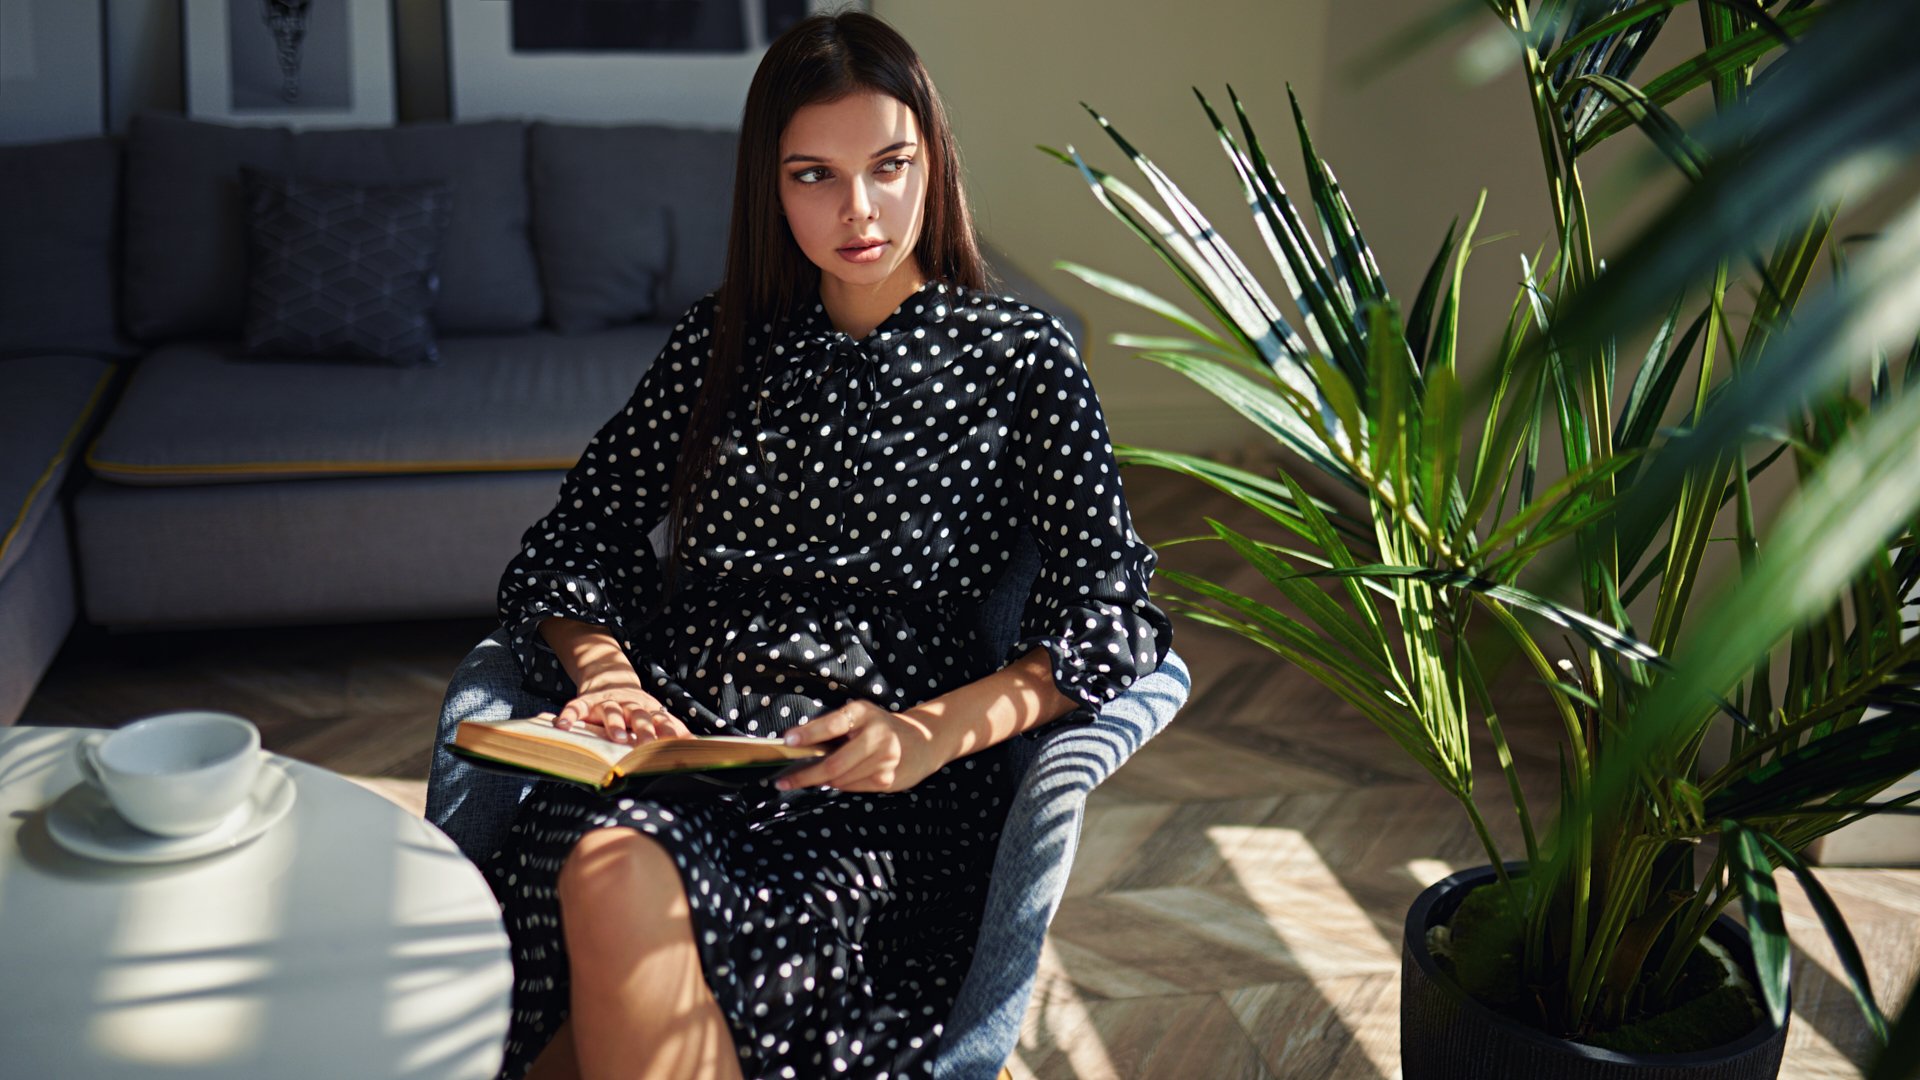 People 1920x1080 women indoors women indoors brunette brown eyes black dress polka dots sitting chair books living rooms plants couch